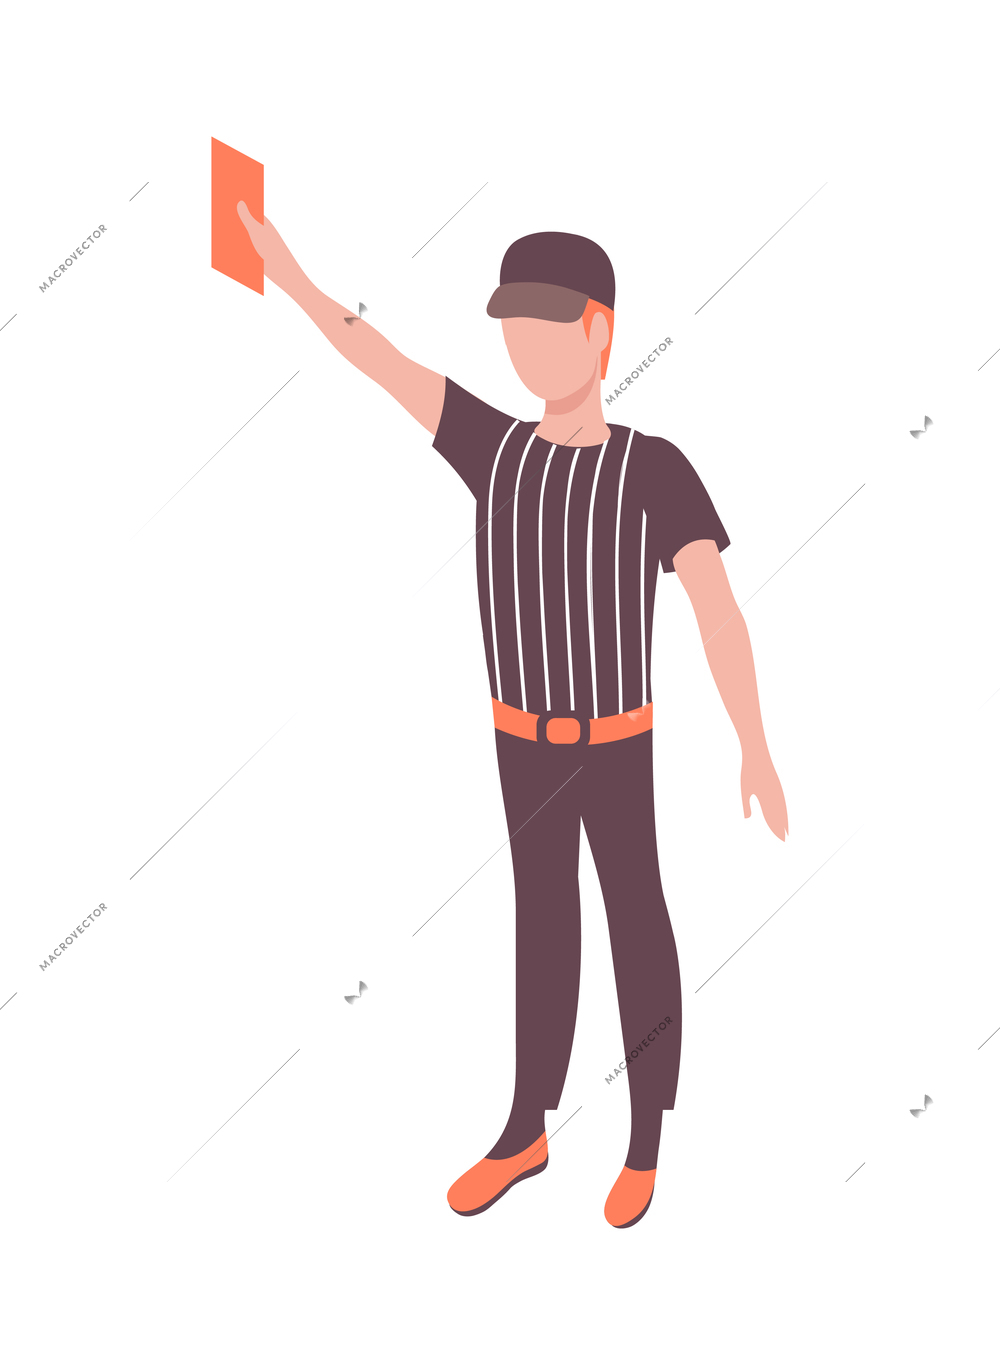 Football referee with red card isometric icon 3d vector illustration